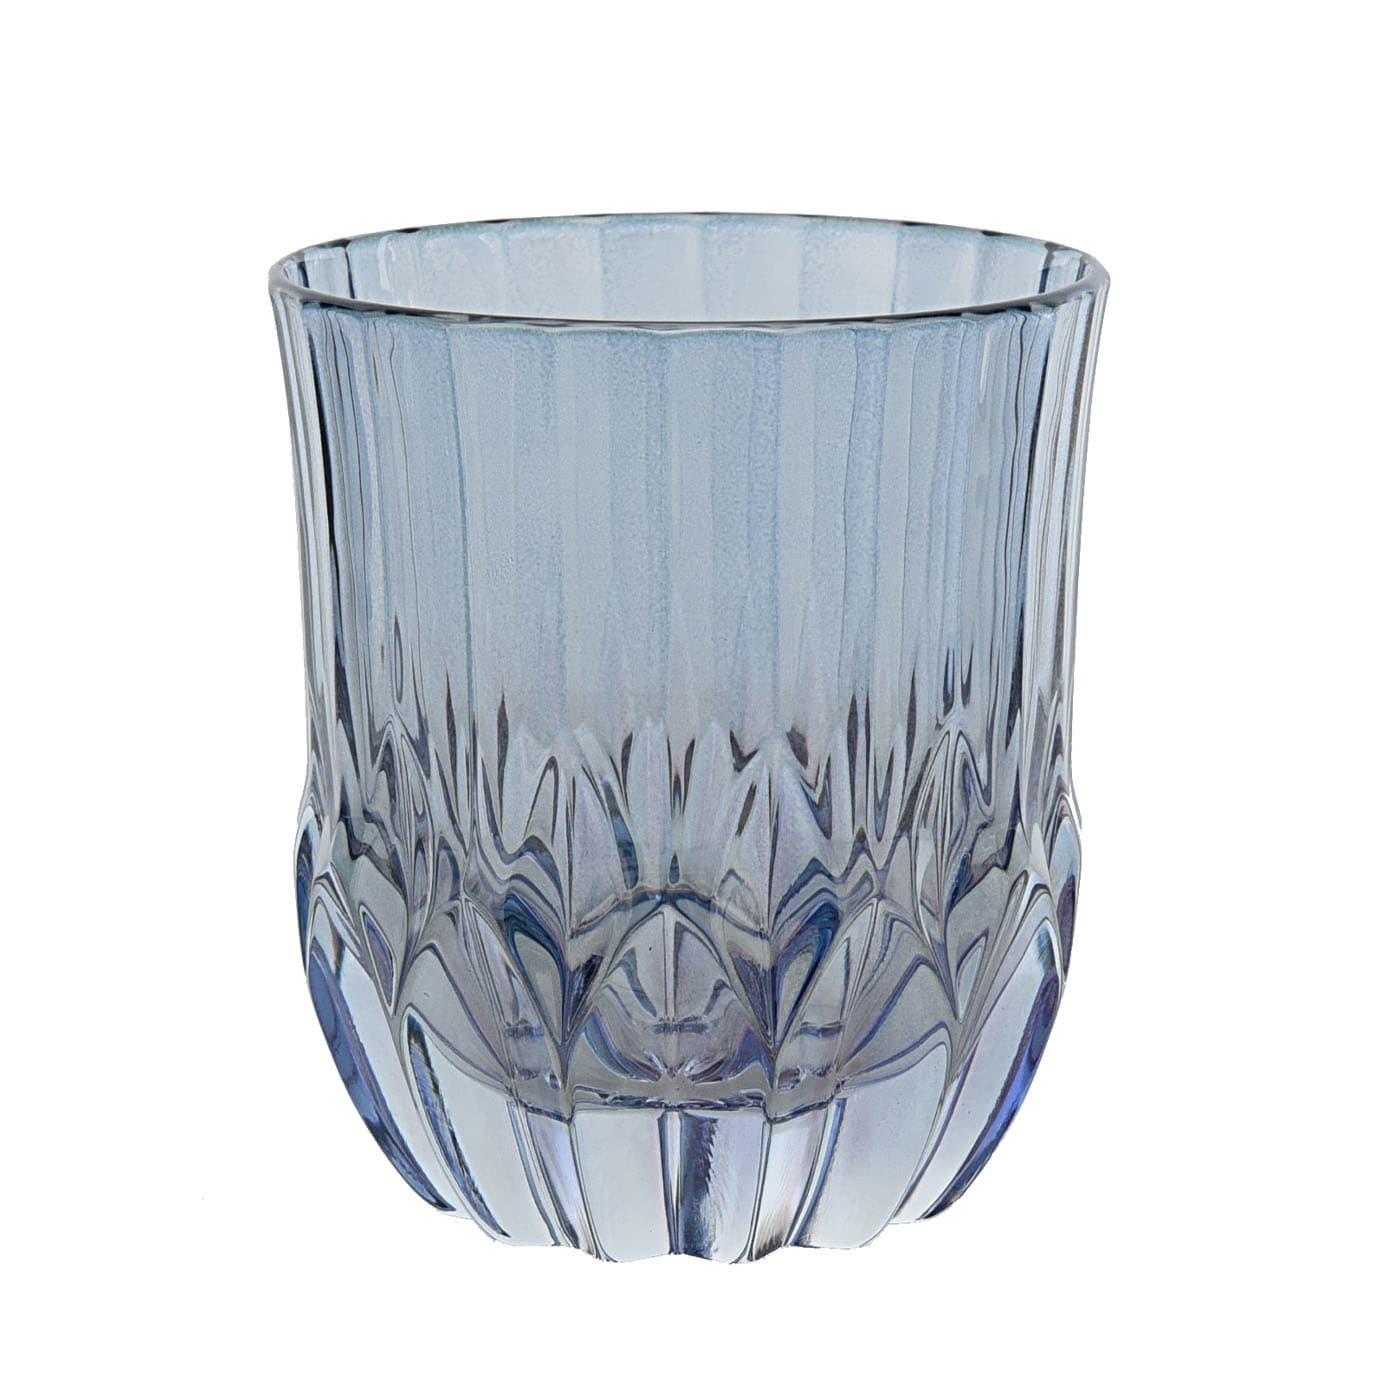 Masterfully crafted and decorated by expert artisans following traditional methods, this set of six water glasses makes a lively and refined addition to any dining set. Part of a series distinguished by a classic-inspired grooved motif, each piece